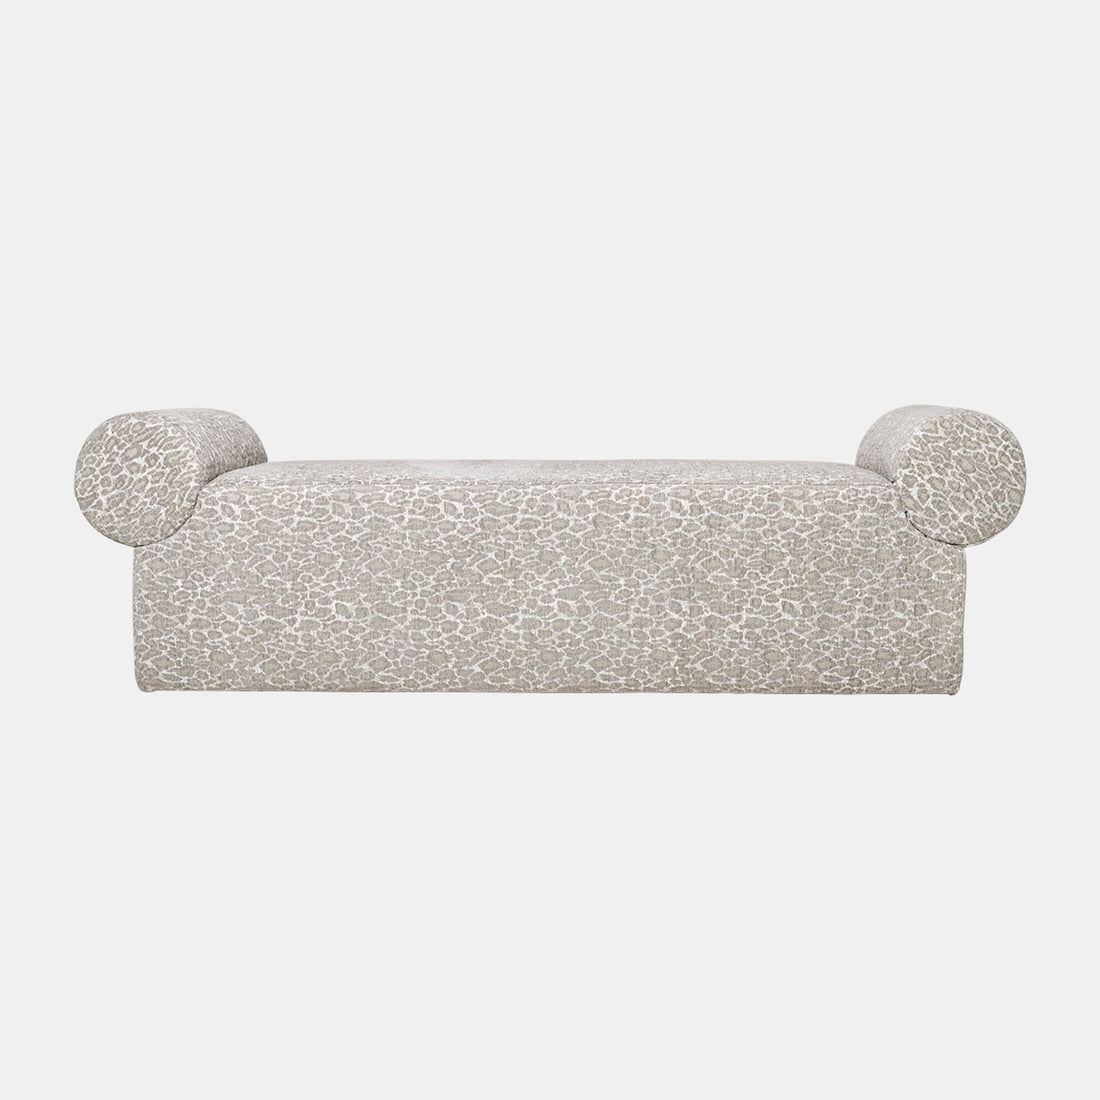 Sagebrook Home Flared Arms Bench  - Gray Leopard